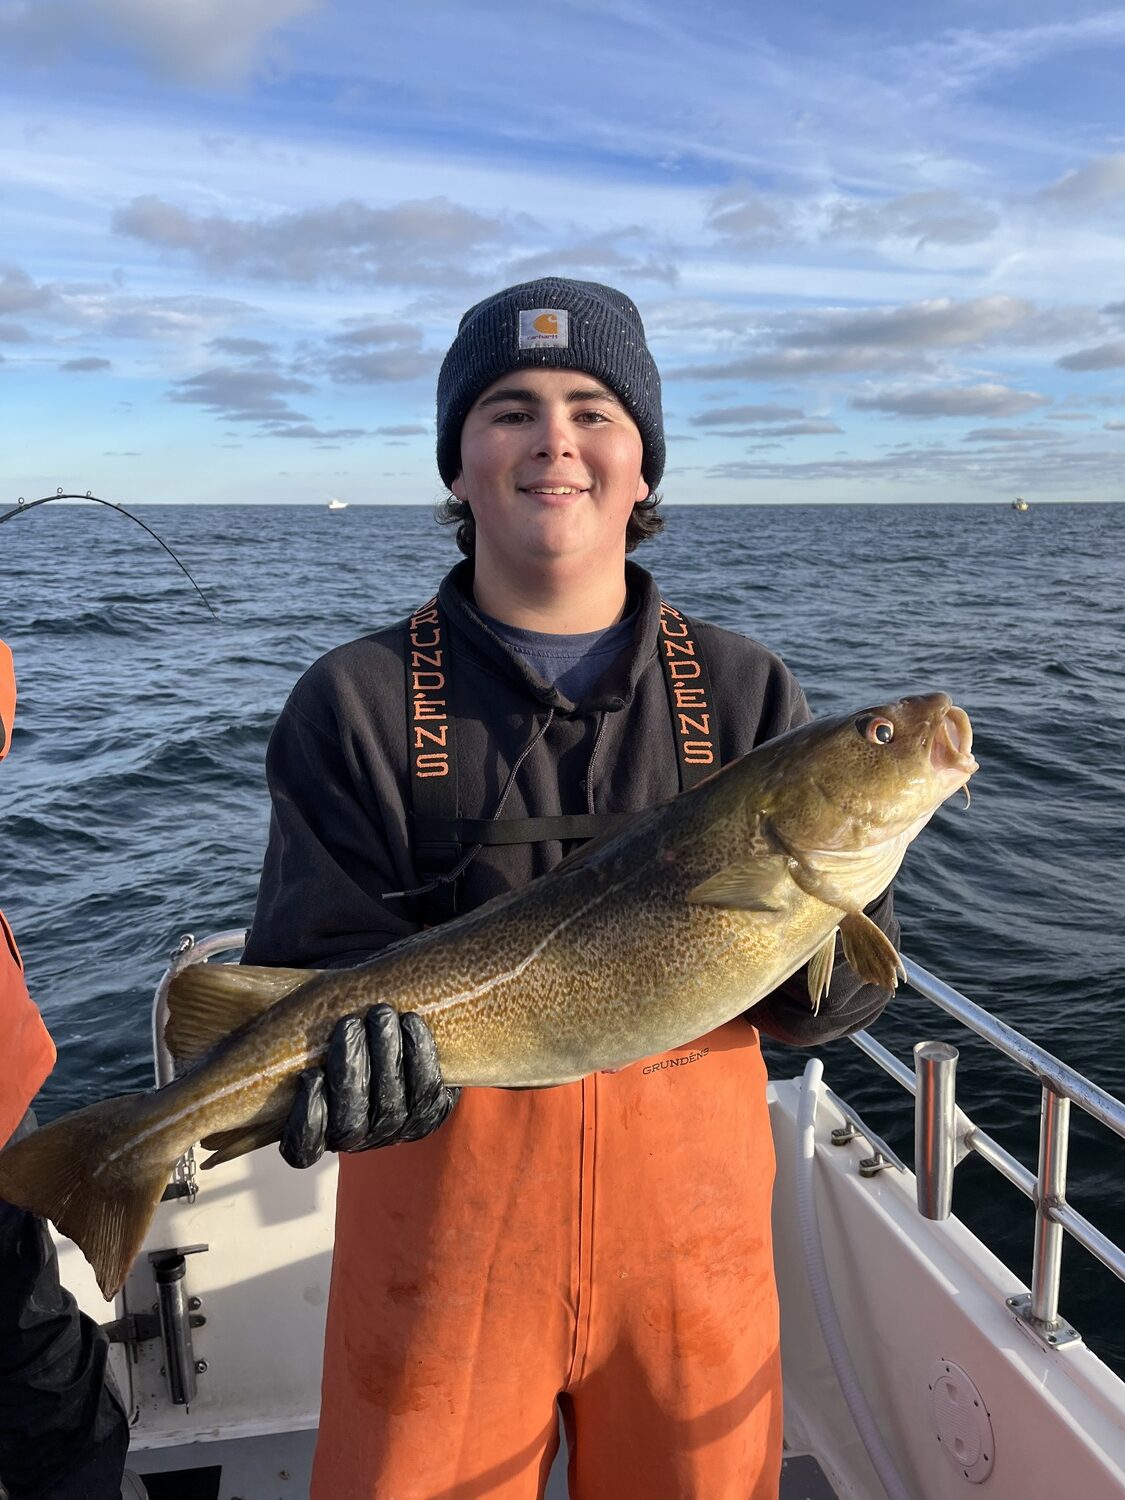 Trevor Meehan decked this nice cod while fishing off Block Island aboard the Montauk charter boat Double D. 
CAPT. DAN GIUNTA